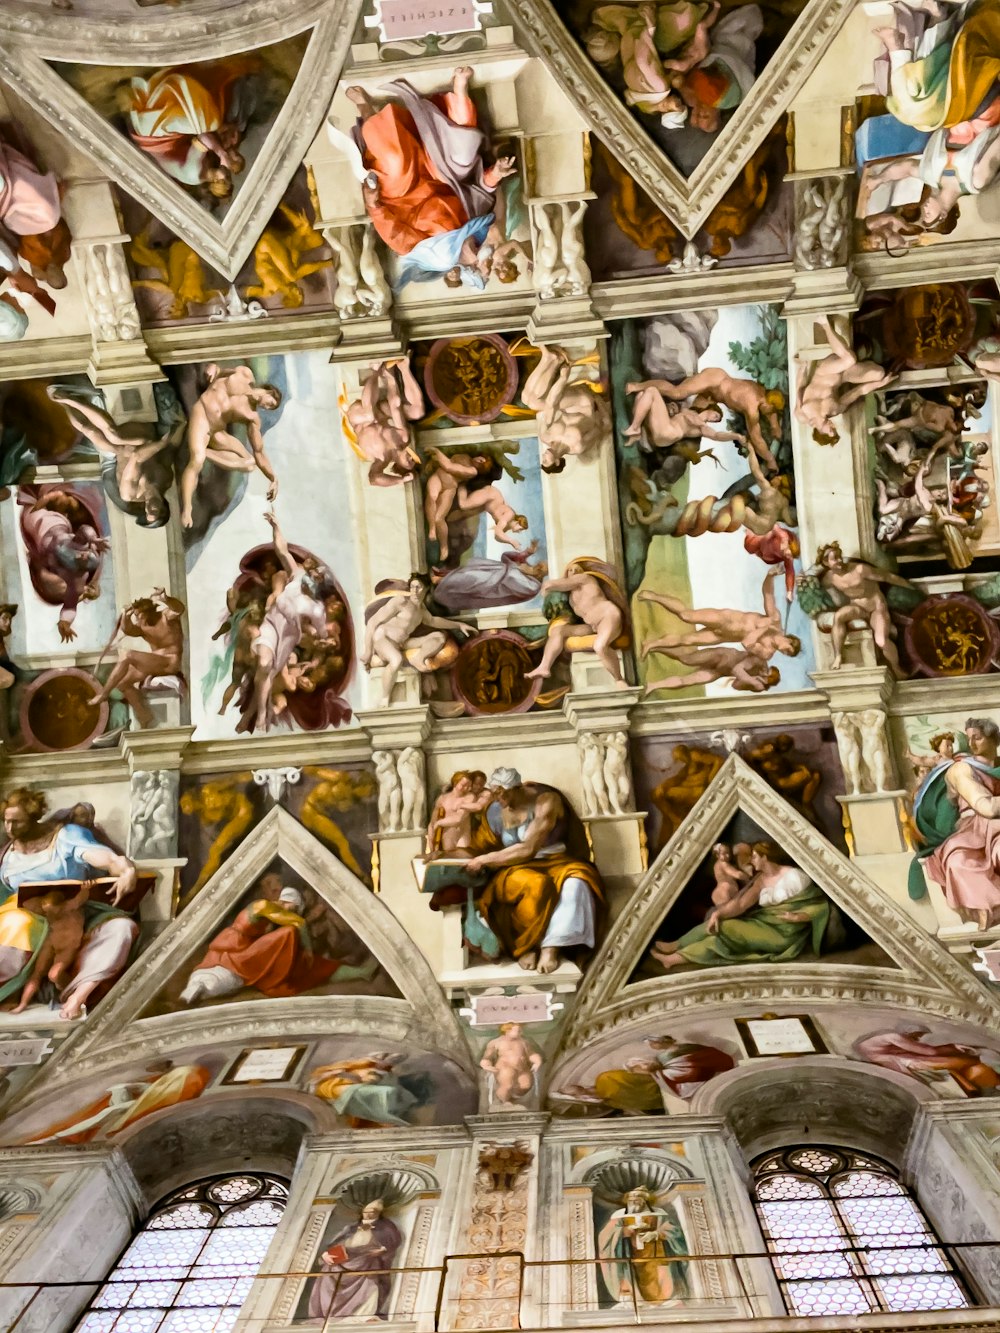 the ceiling of a building with many paintings on it